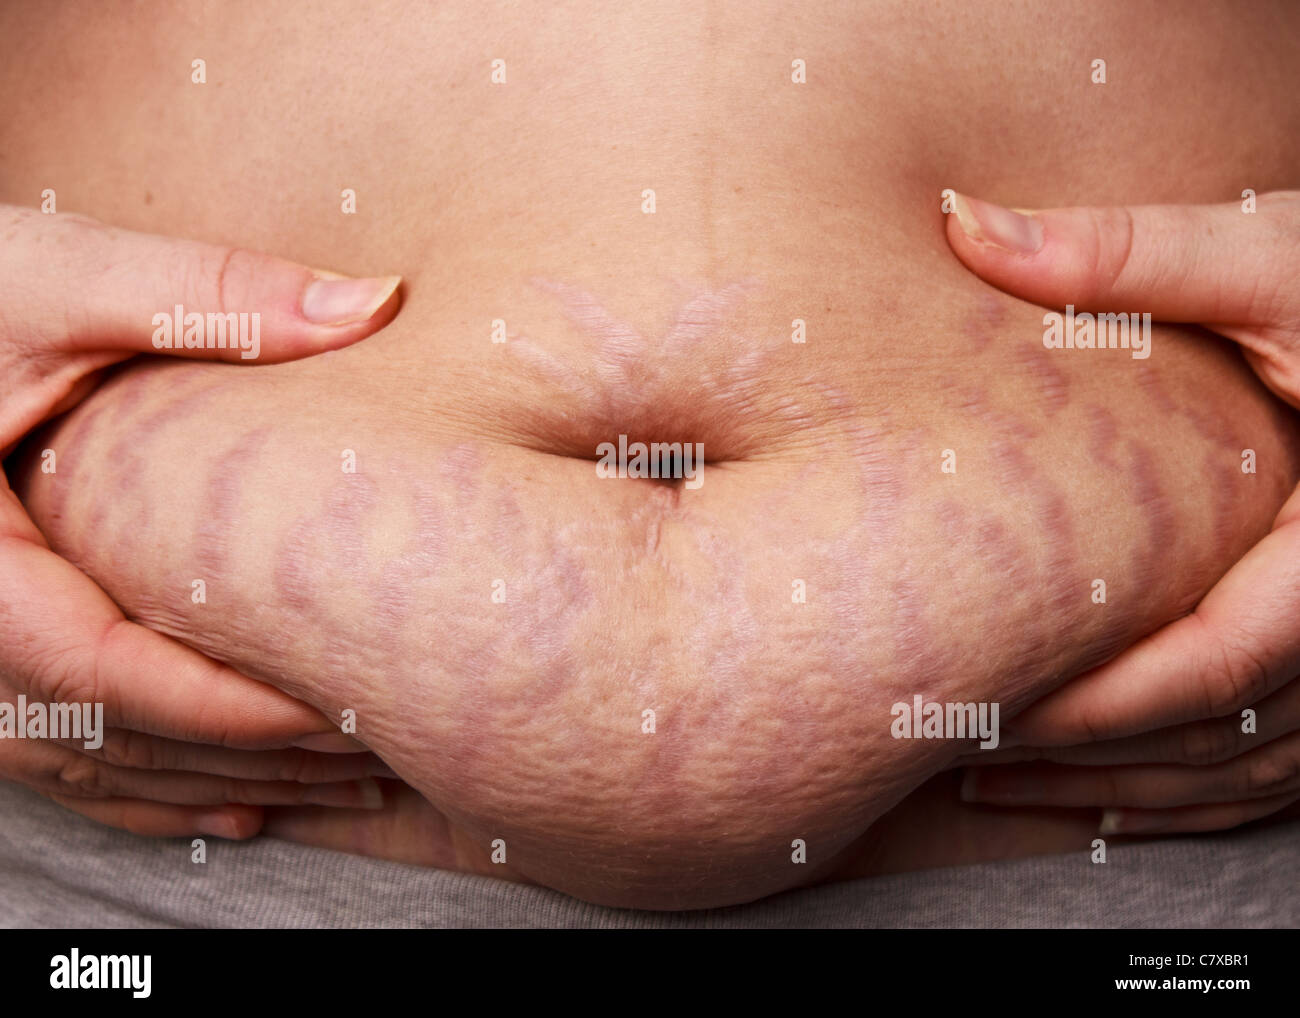 Woman pinching post-pregnancy tummy with stretch marks Stock Photo